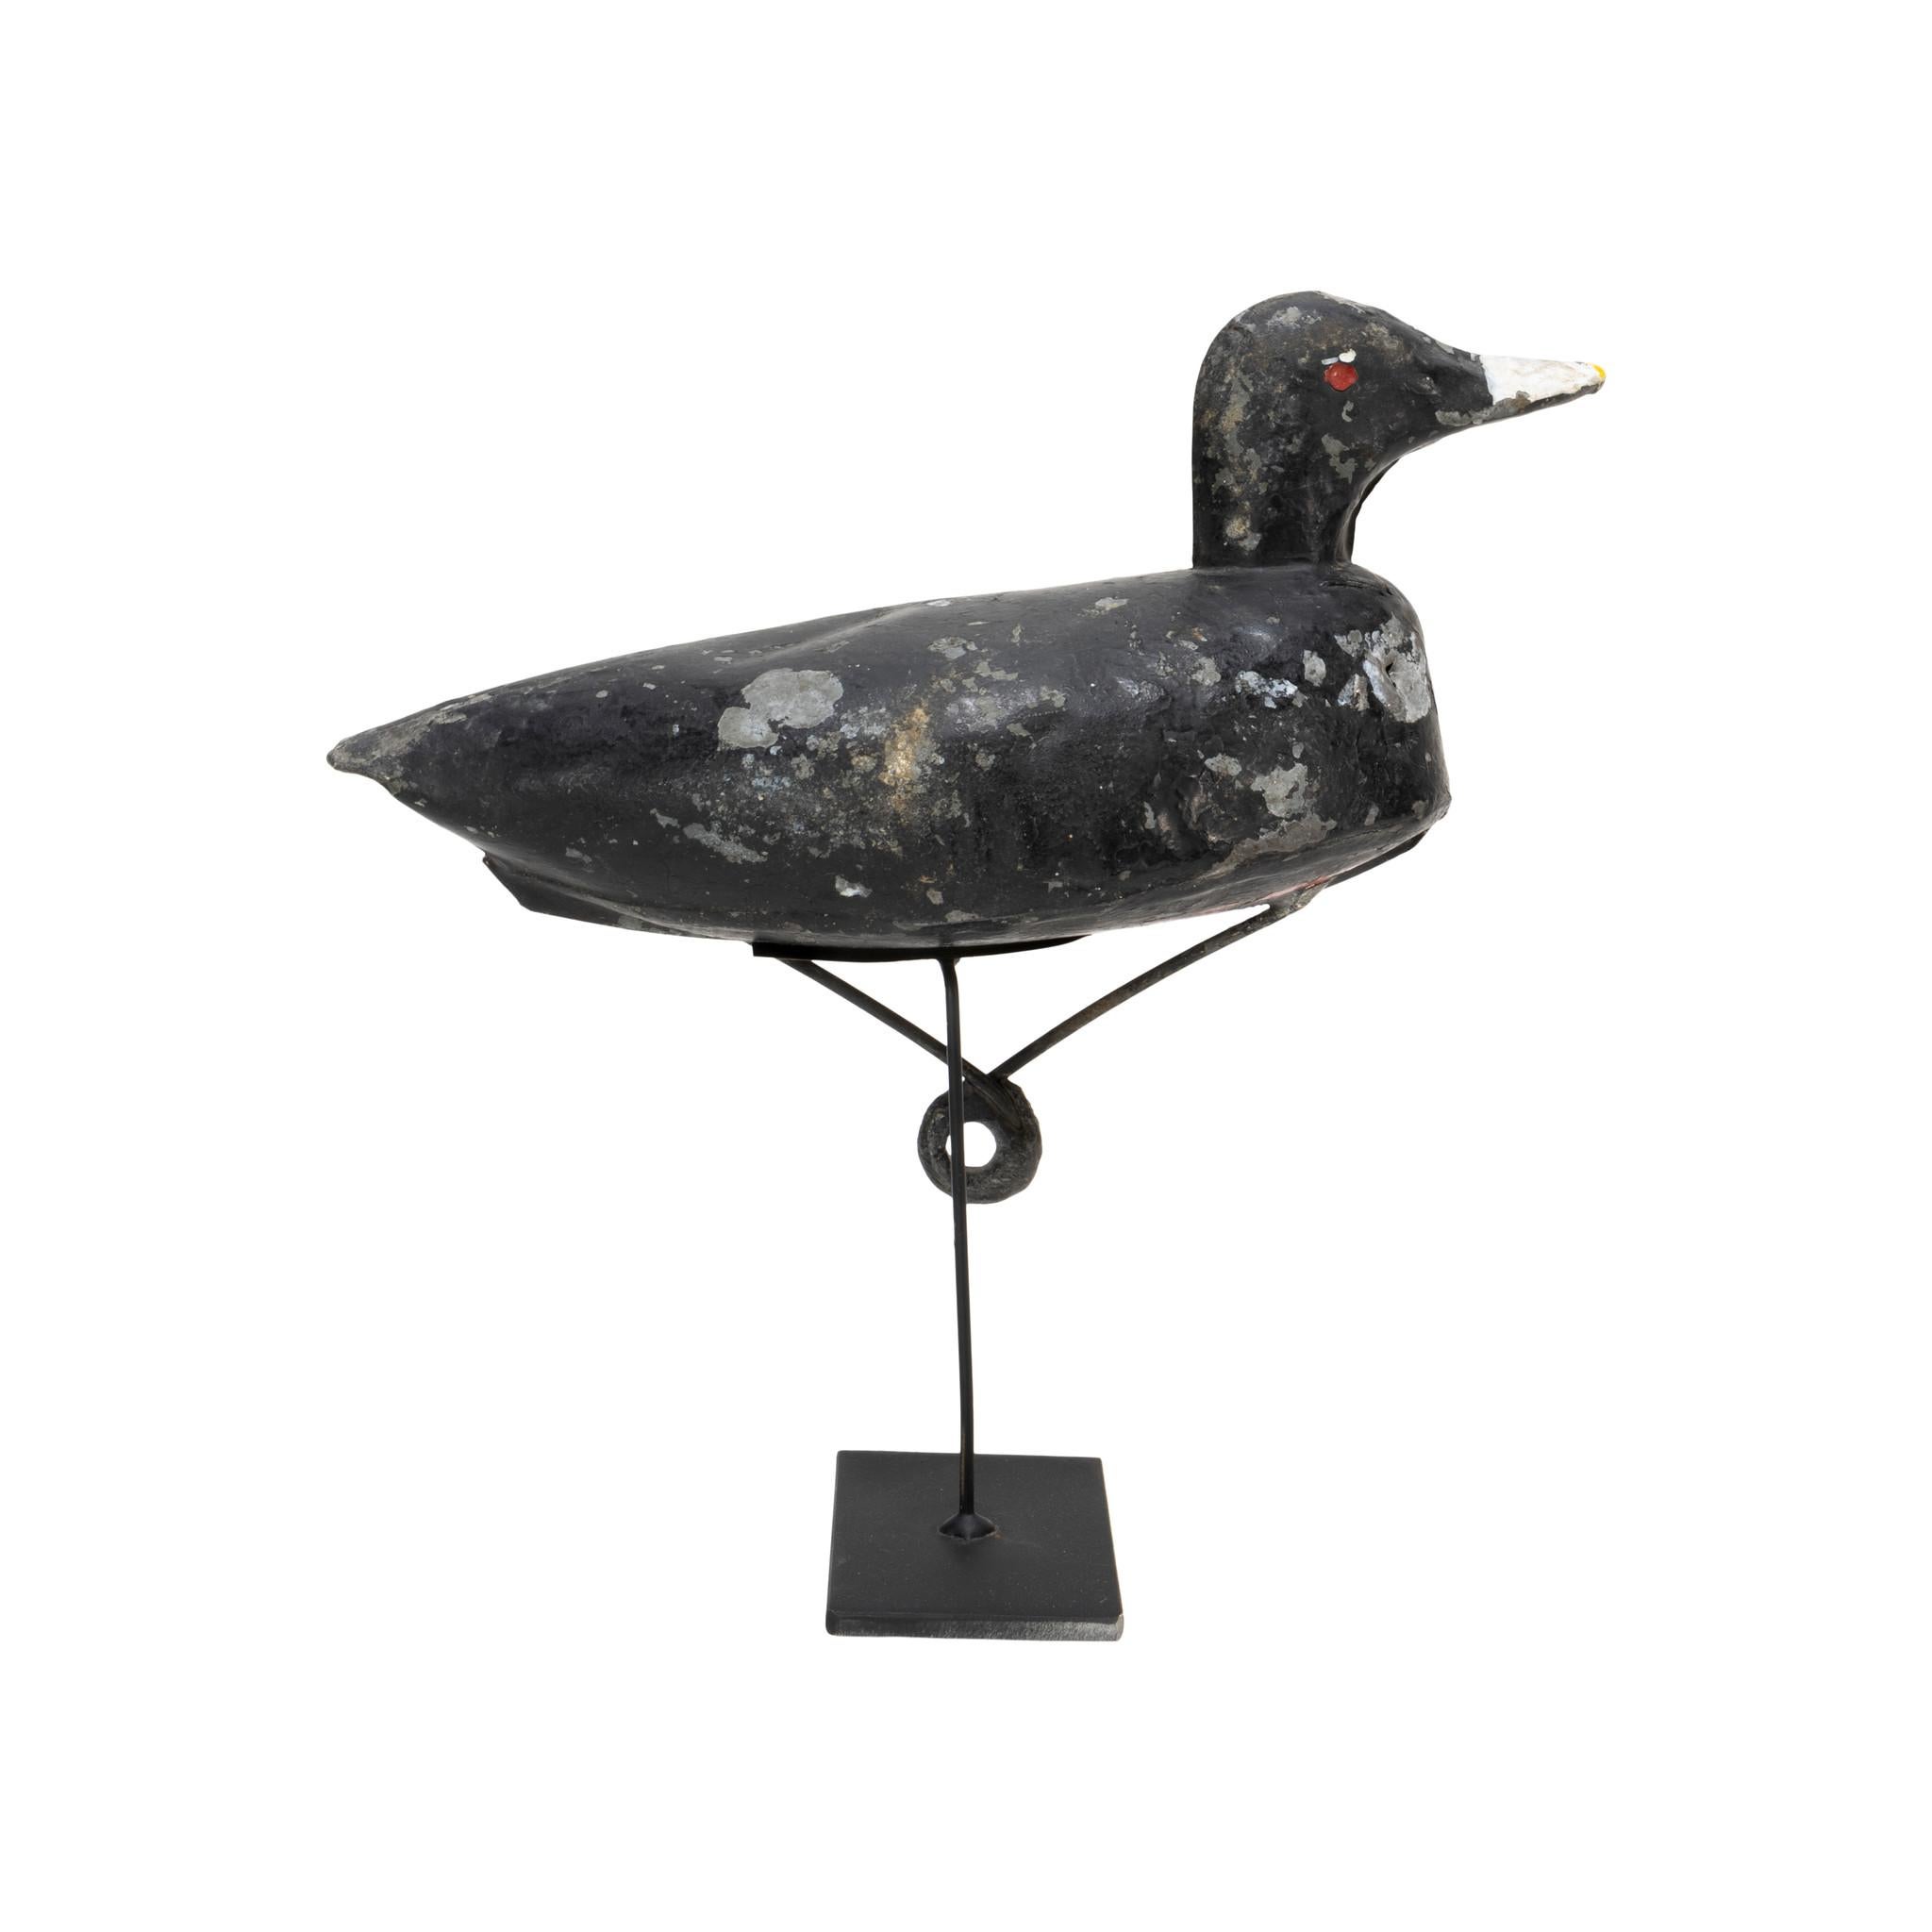 Tiny hollow coot from Freemont, WI. Collector acquired six- let five go, this was the best one - kept for his collection. Chip shots and all! Neat collector piece.

Period: circa 1900s-1920s
Origin: Freemont, Wisconsin
Size: 1' x 5